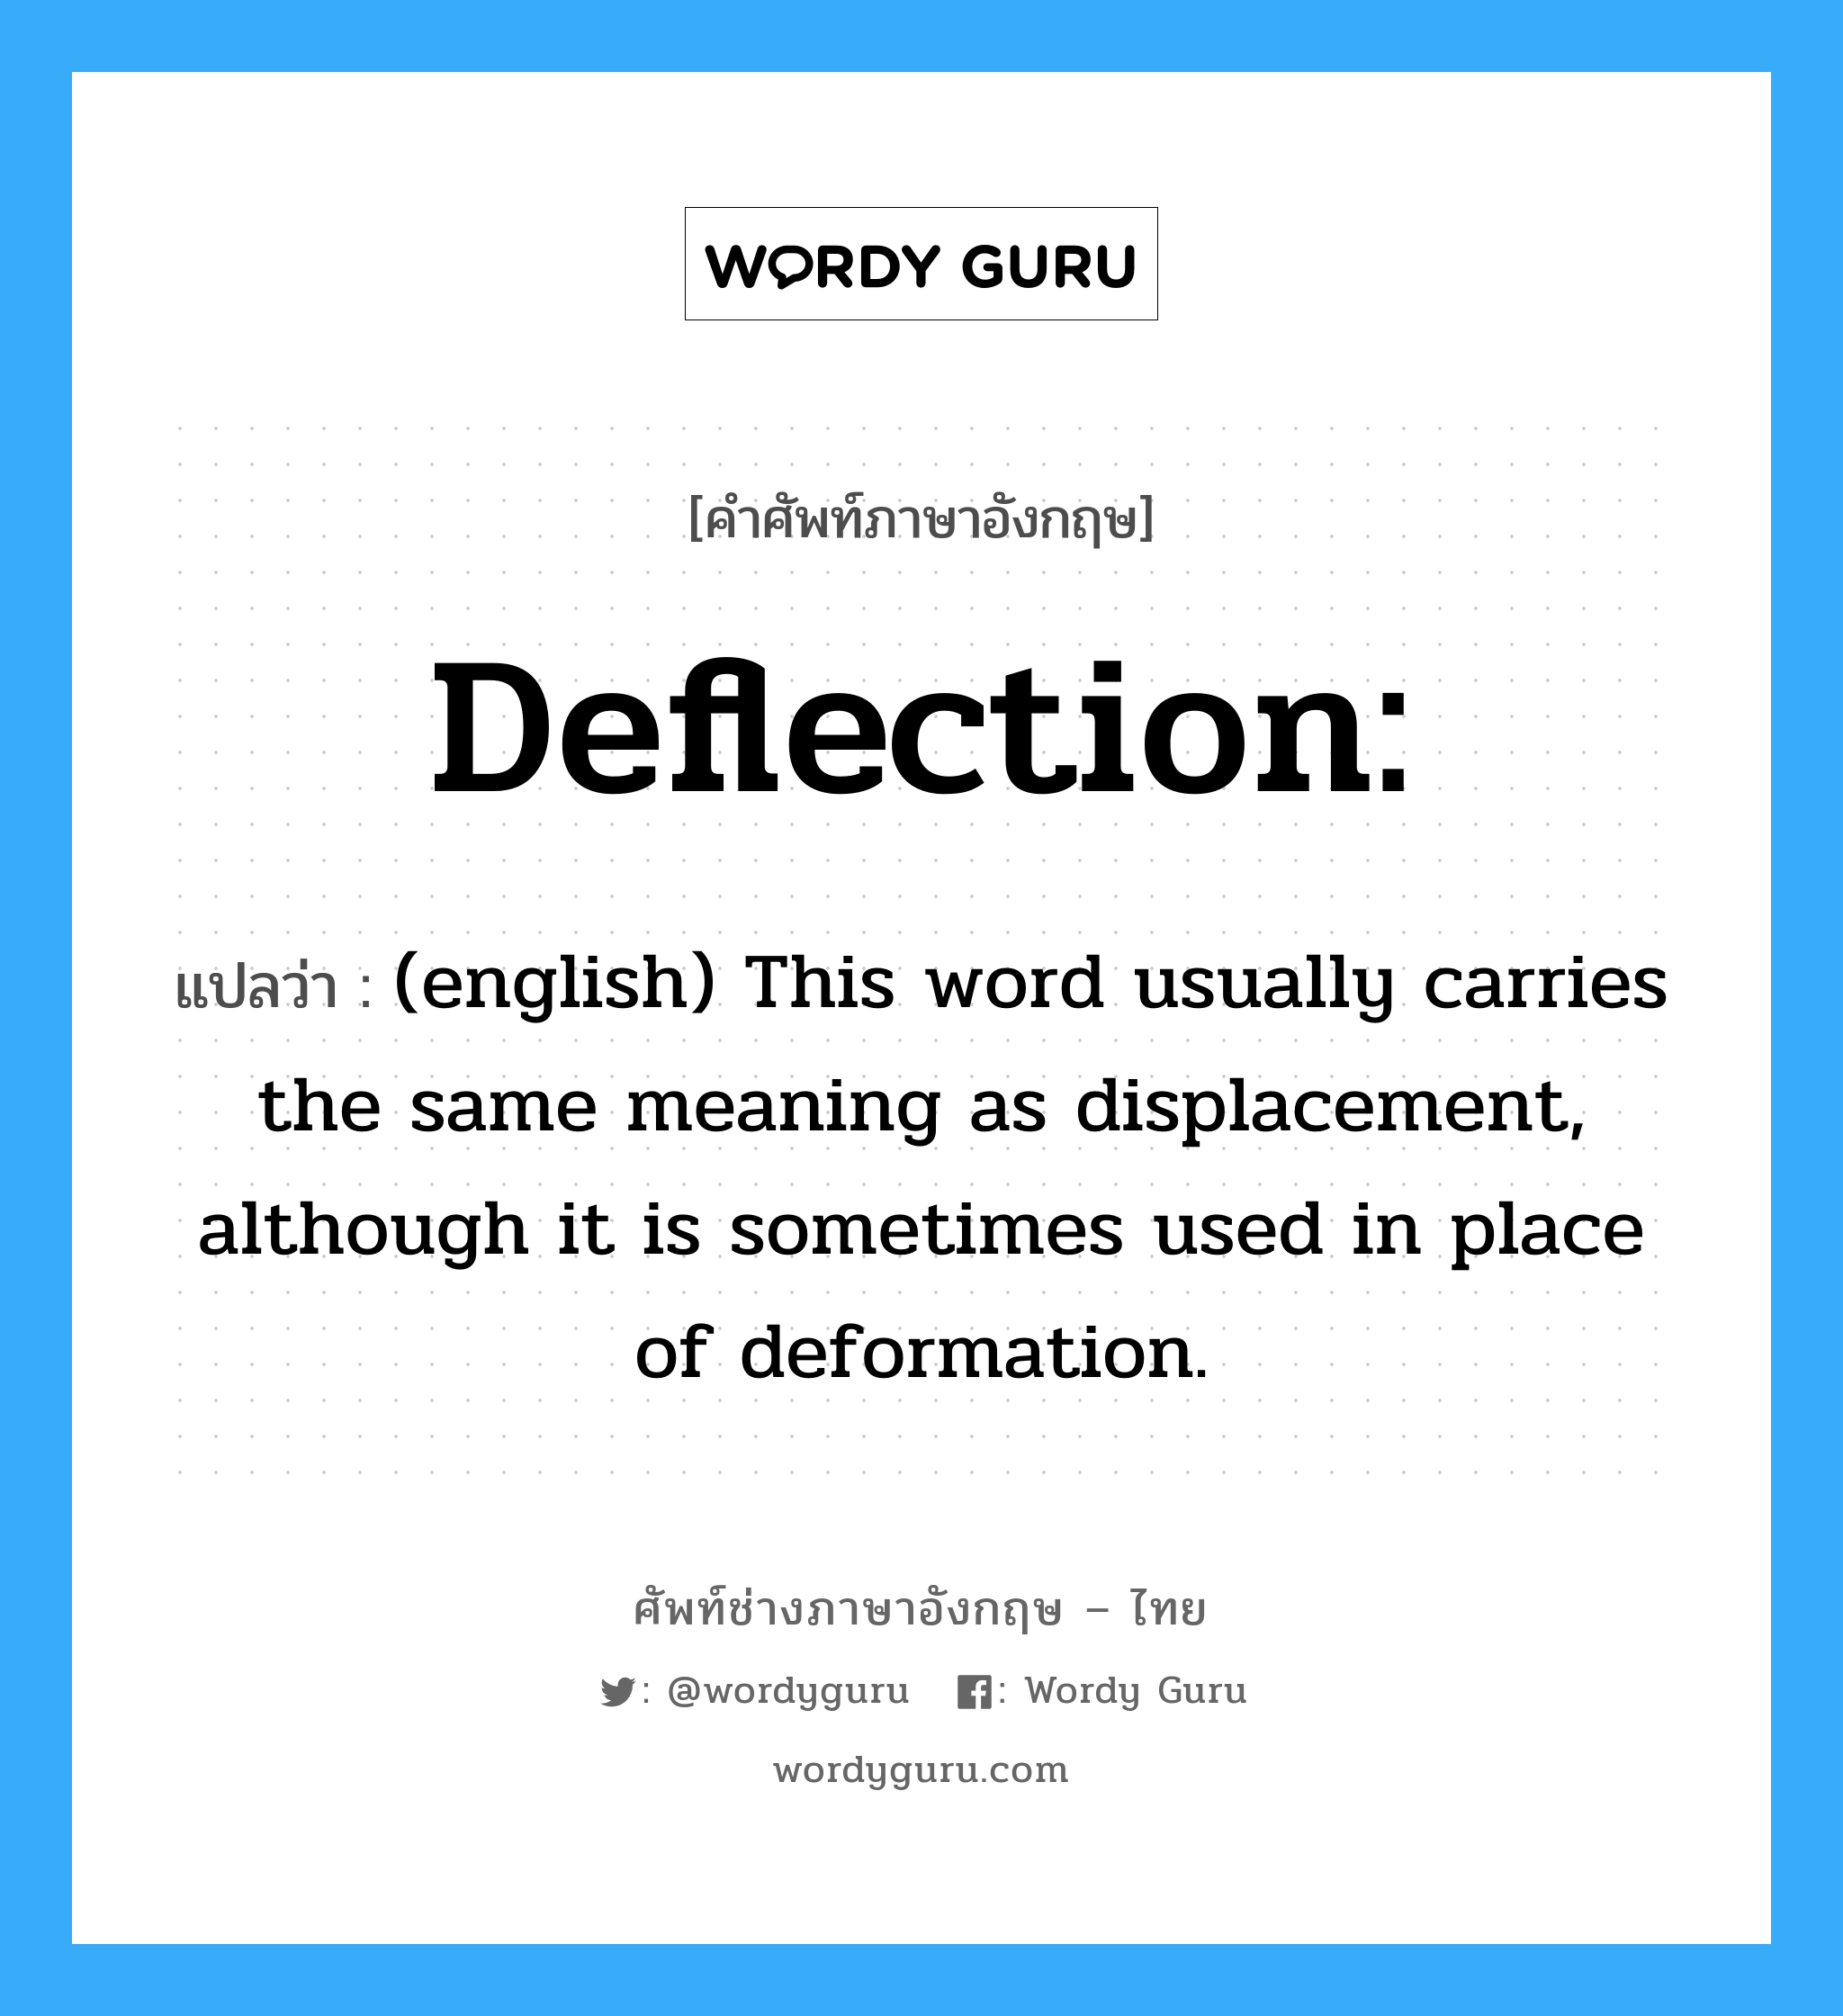 (english) This word usually carries the same meaning as displacement, although it is sometimes used in place of deformation. ภาษาอังกฤษ?, คำศัพท์ช่างภาษาอังกฤษ - ไทย (english) This word usually carries the same meaning as displacement, although it is sometimes used in place of deformation. คำศัพท์ภาษาอังกฤษ (english) This word usually carries the same meaning as displacement, although it is sometimes used in place of deformation. แปลว่า Deflection: